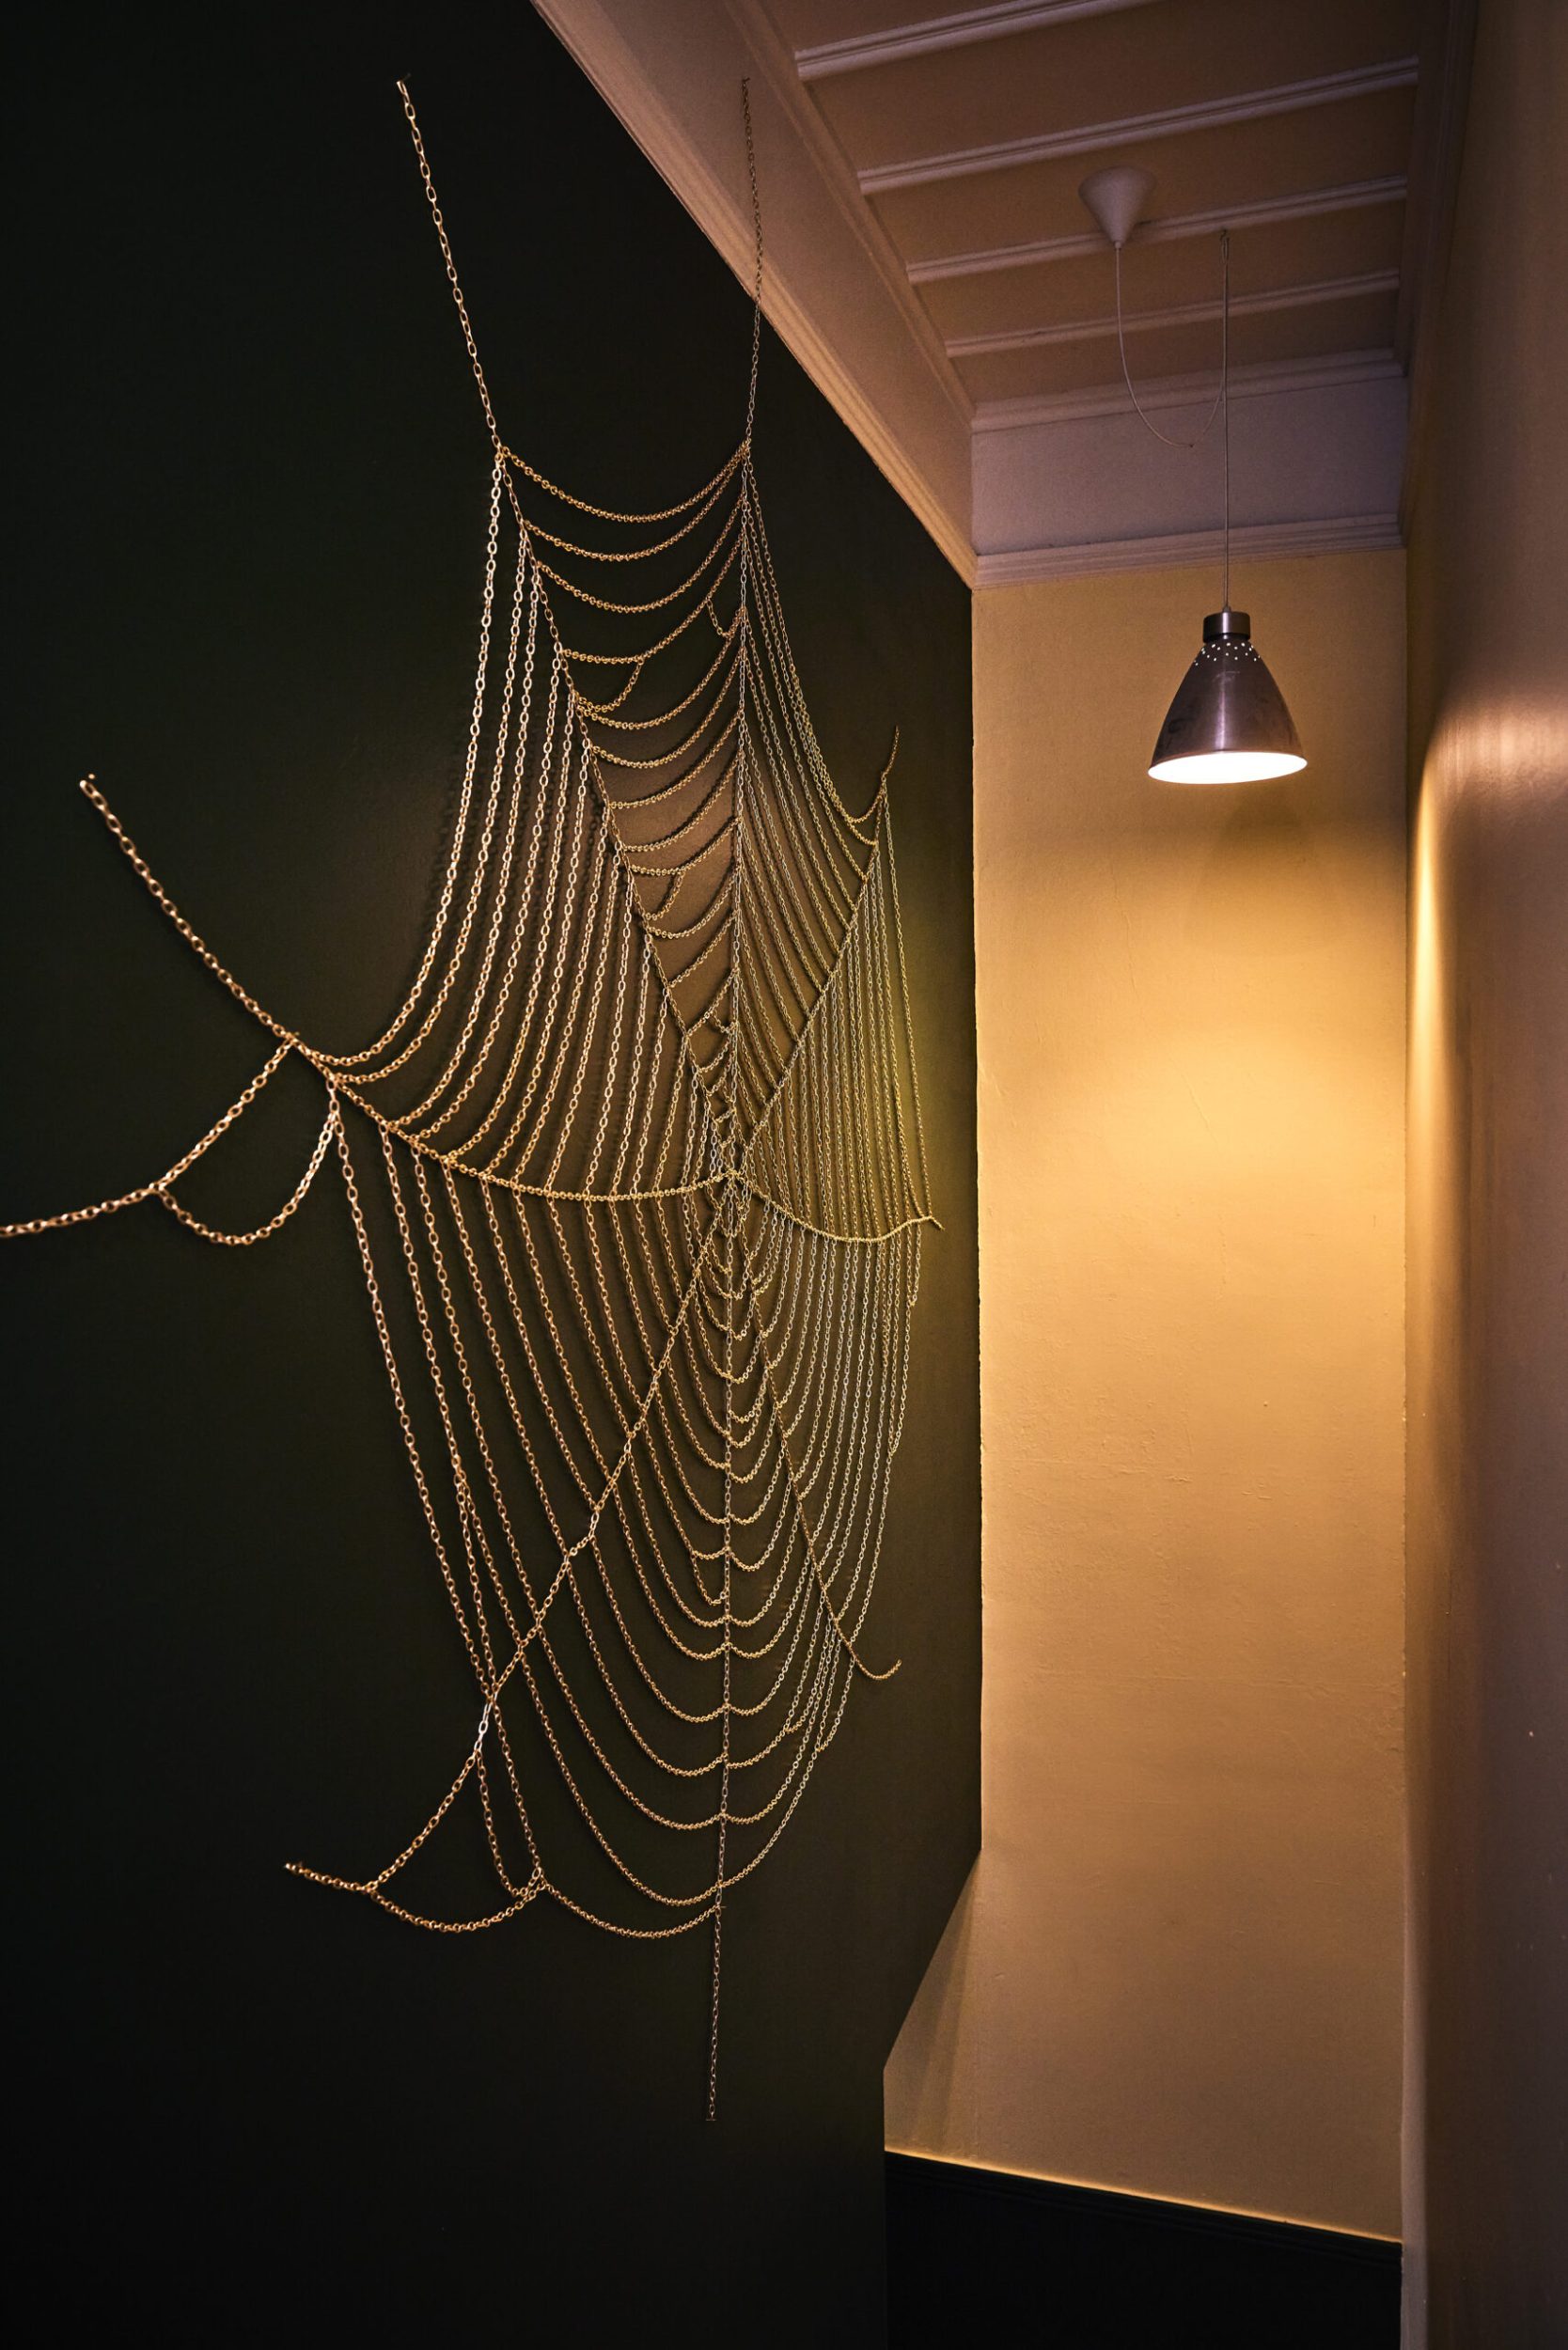 A black wall with a cobweb artwork made out of a gold chain